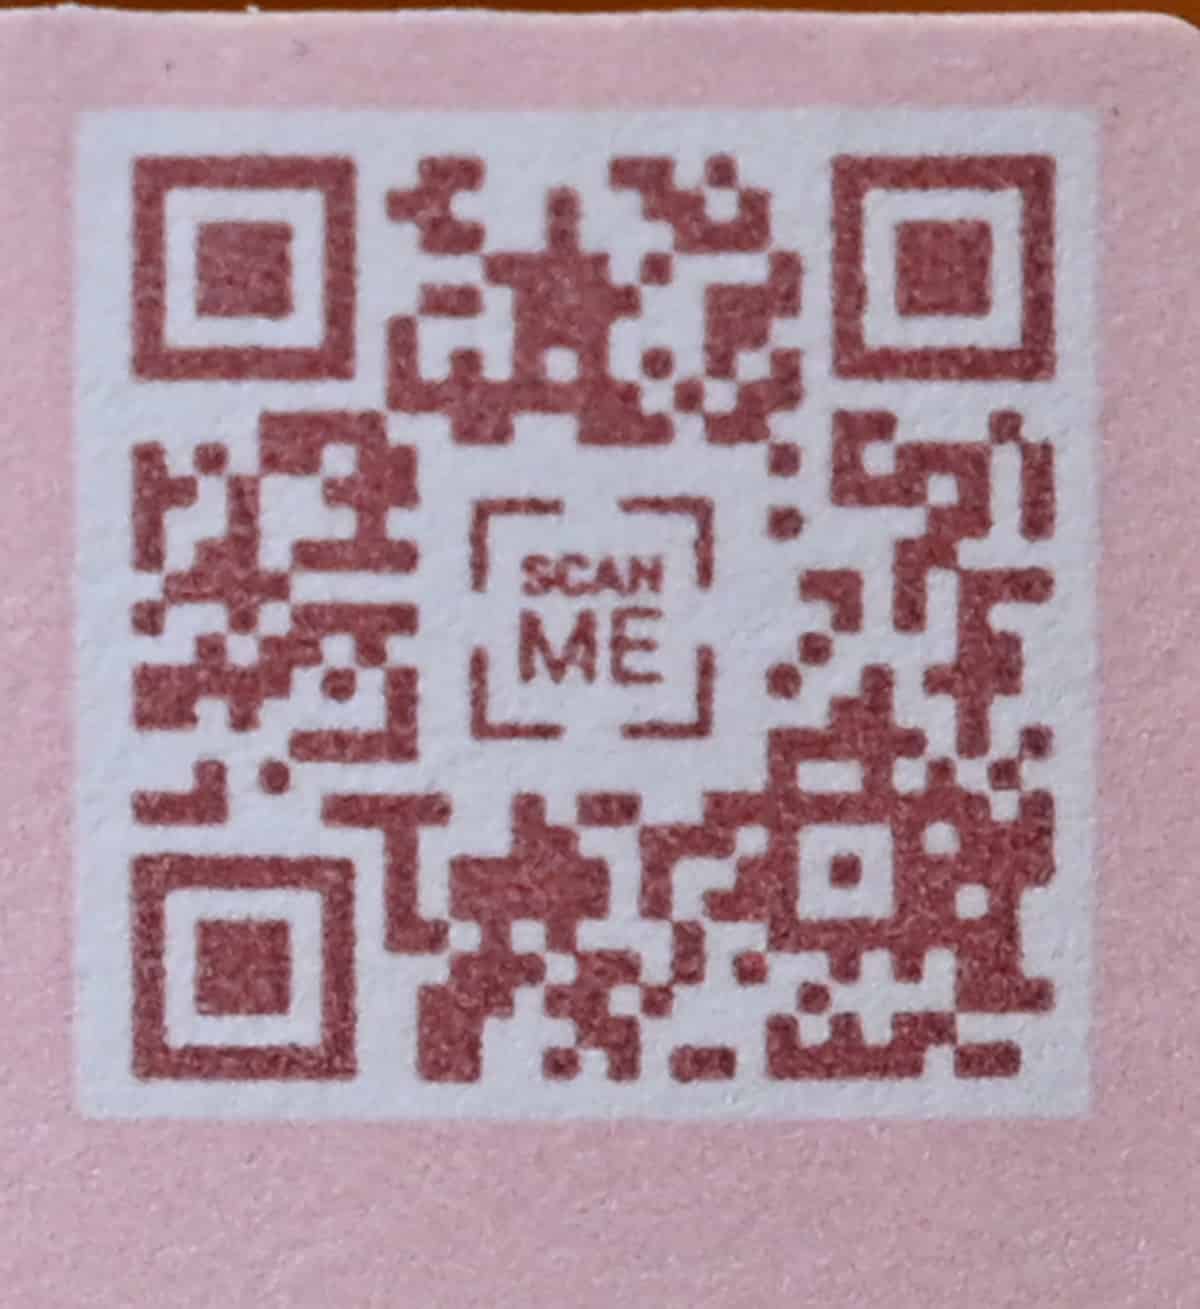 Image of the QR code that comes on the back of the bottle. The QR code links to information about the prosecco.